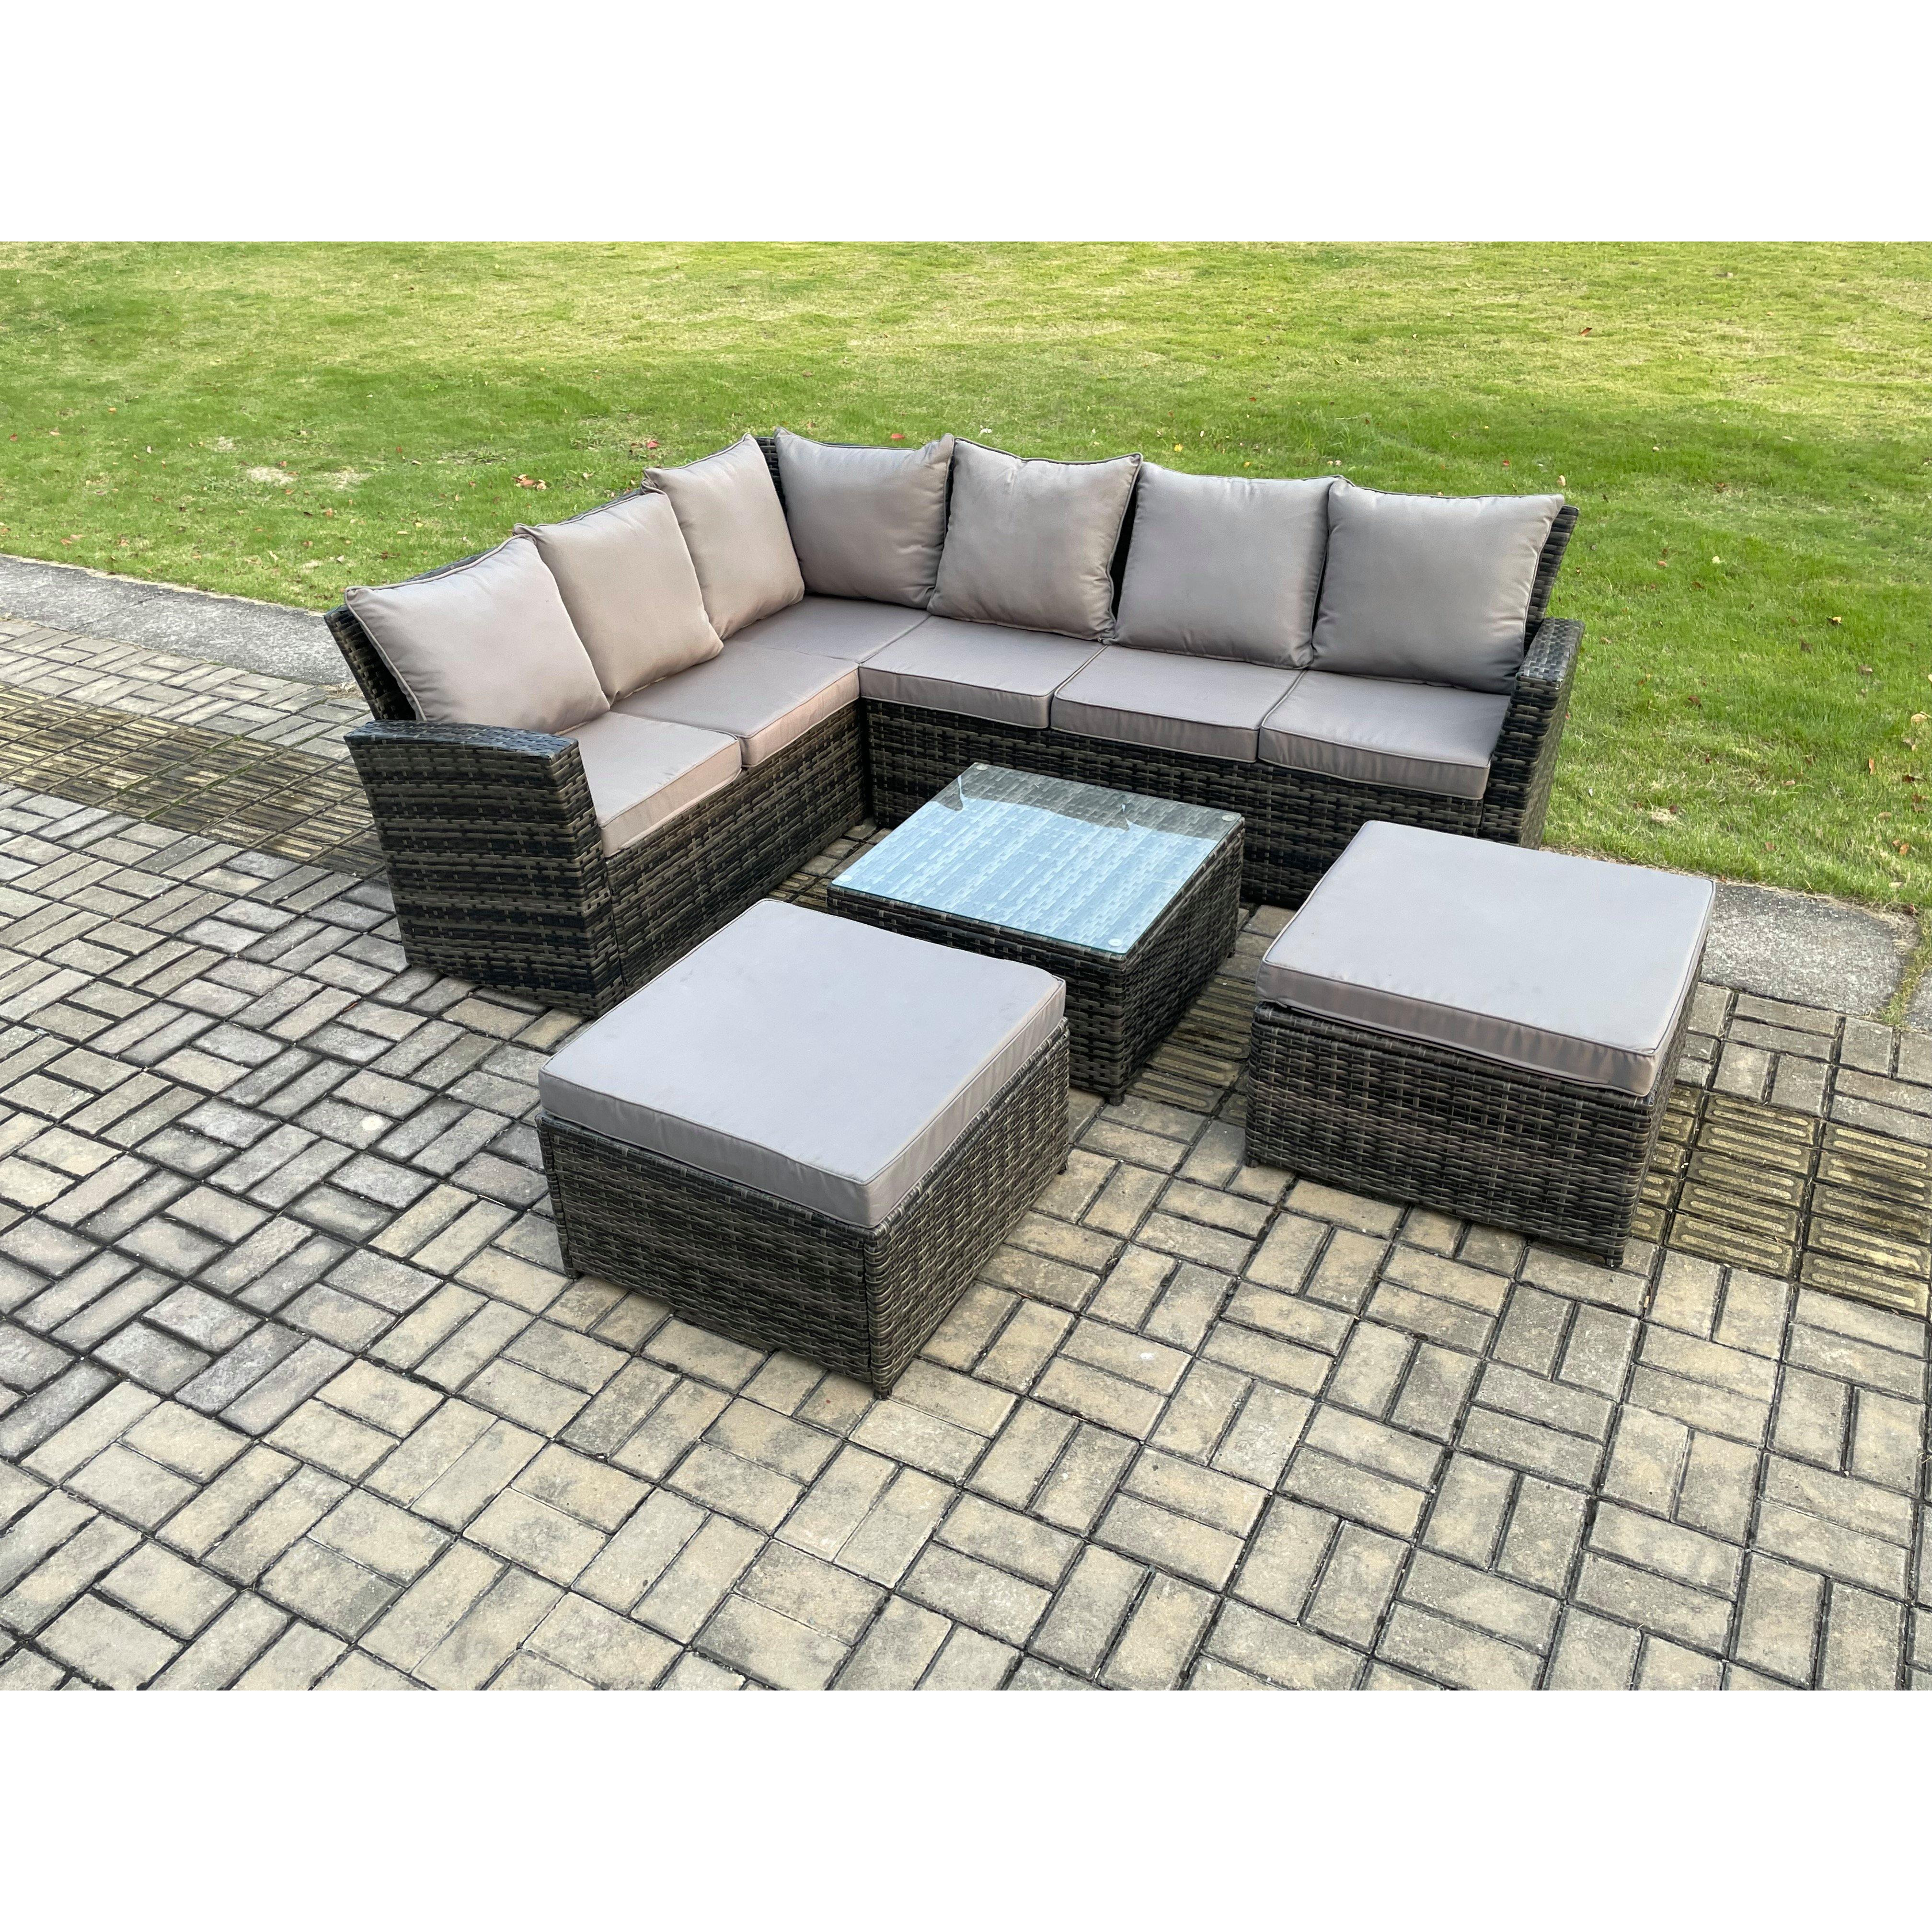 Rattan Garden Furniture Set Outdoor Lounge Corner Sofa Set With Square Coffee Table 2 Big Footstool 8 Seater - image 1